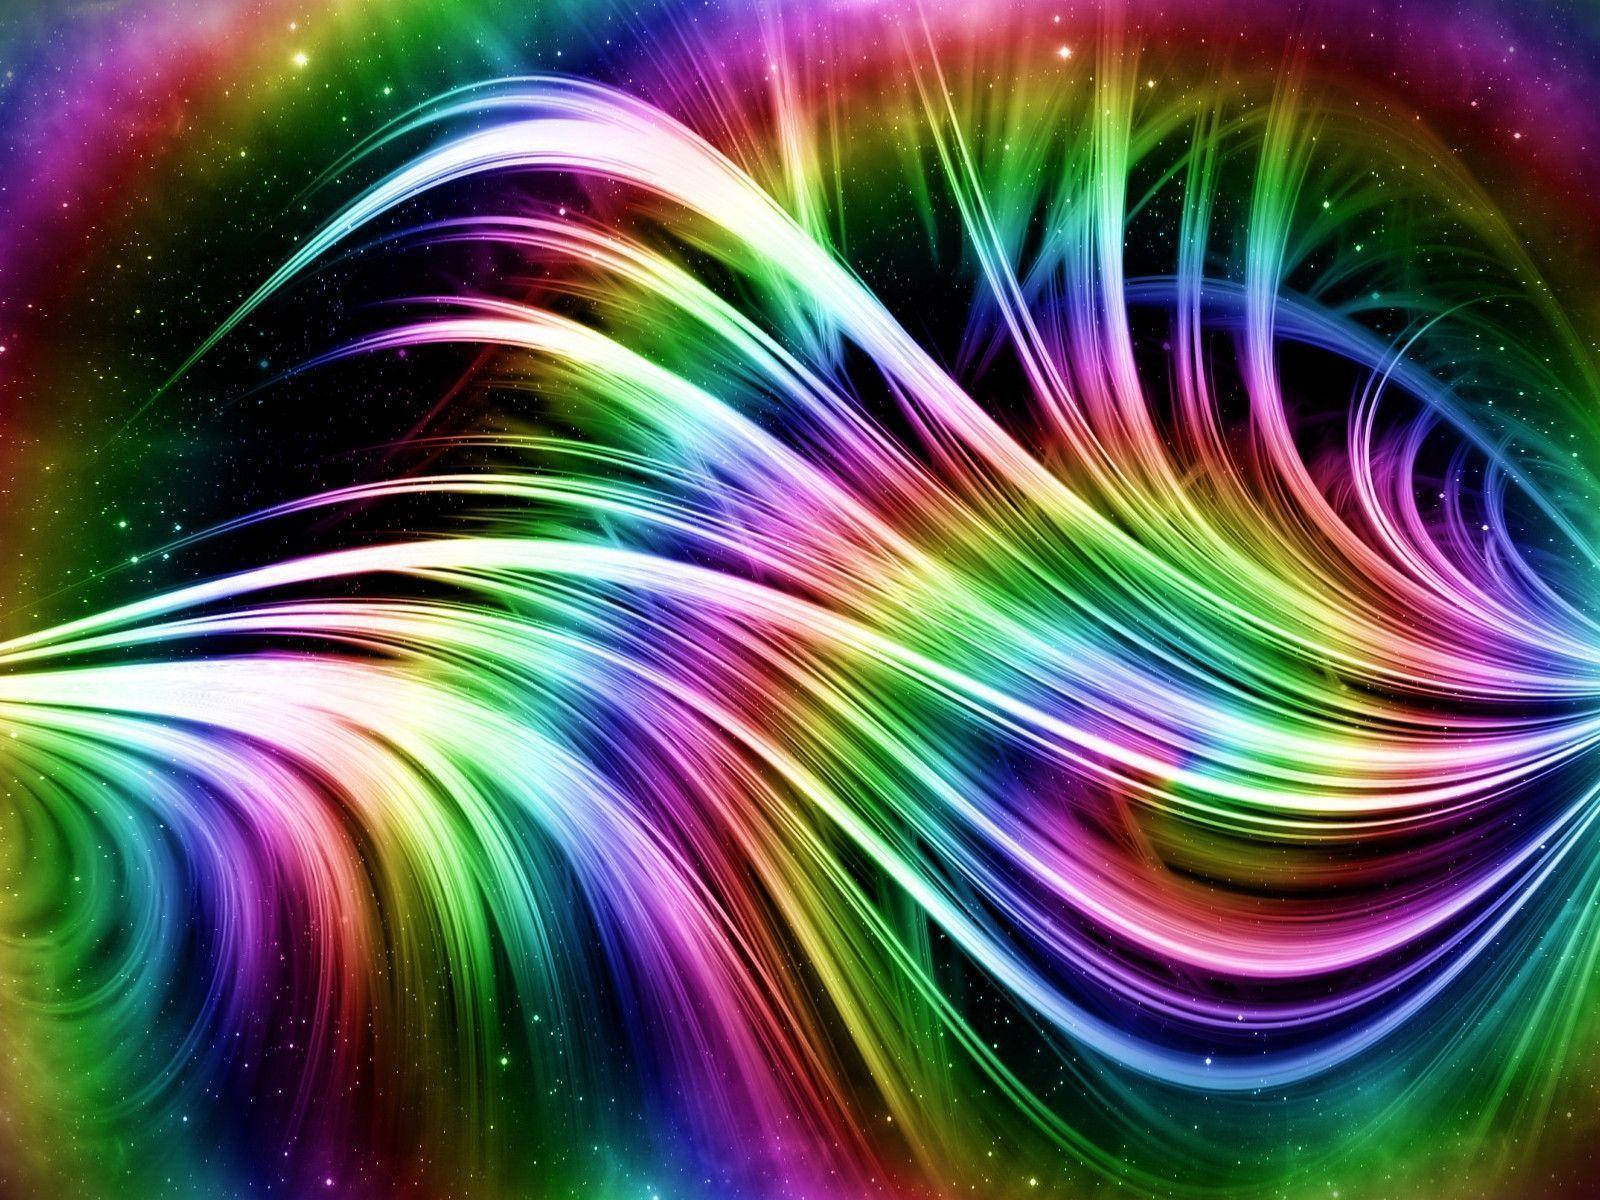 Enjoy The Vibrancy Of Cool, Colorful Graphics. Wallpaper